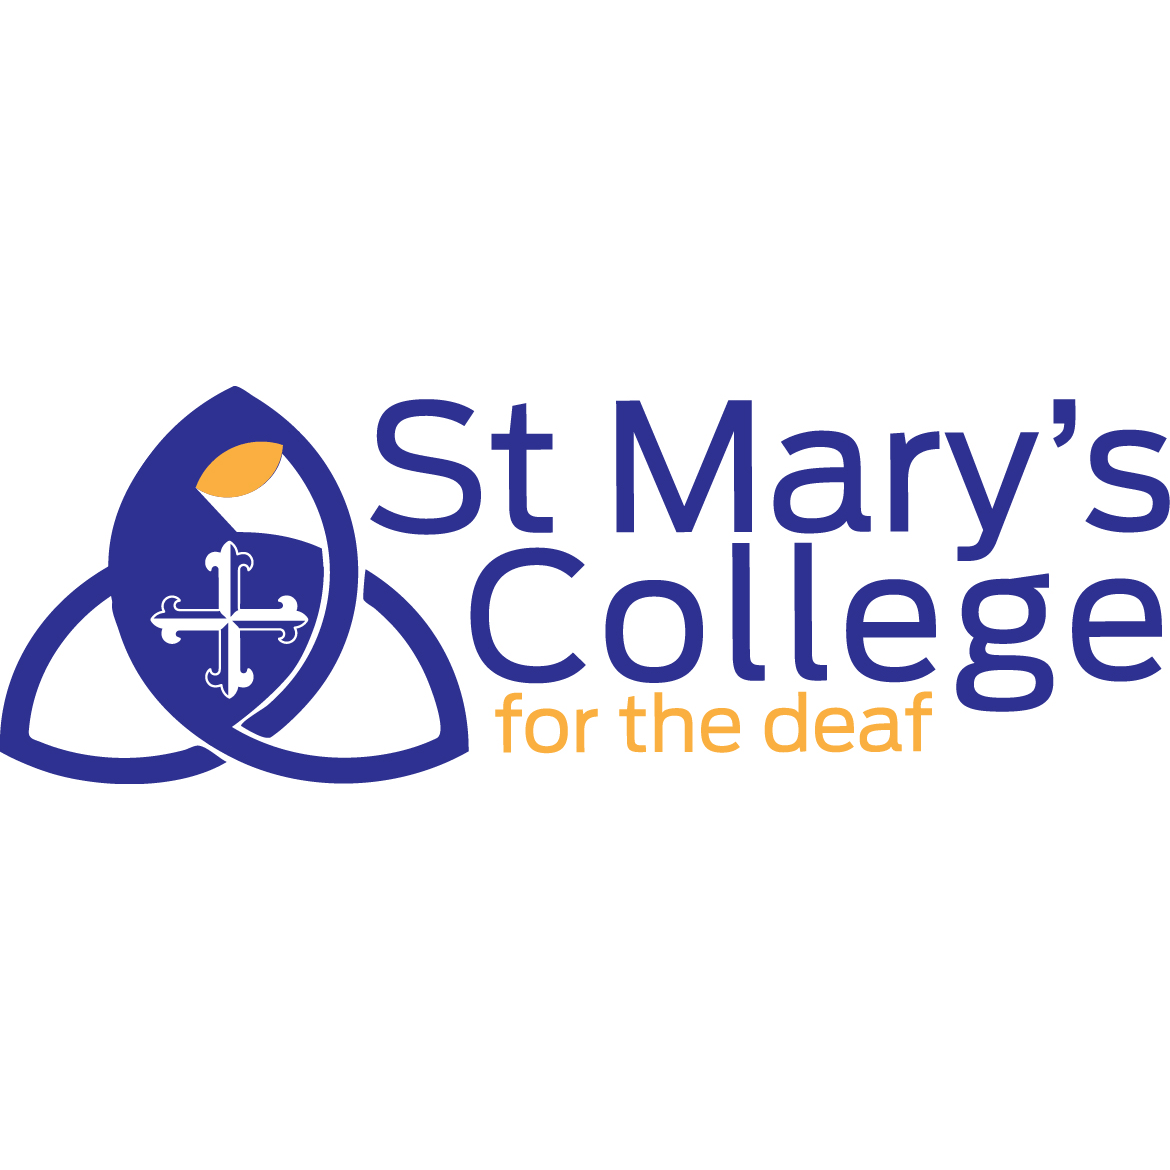 St Mary's College for the Deaf